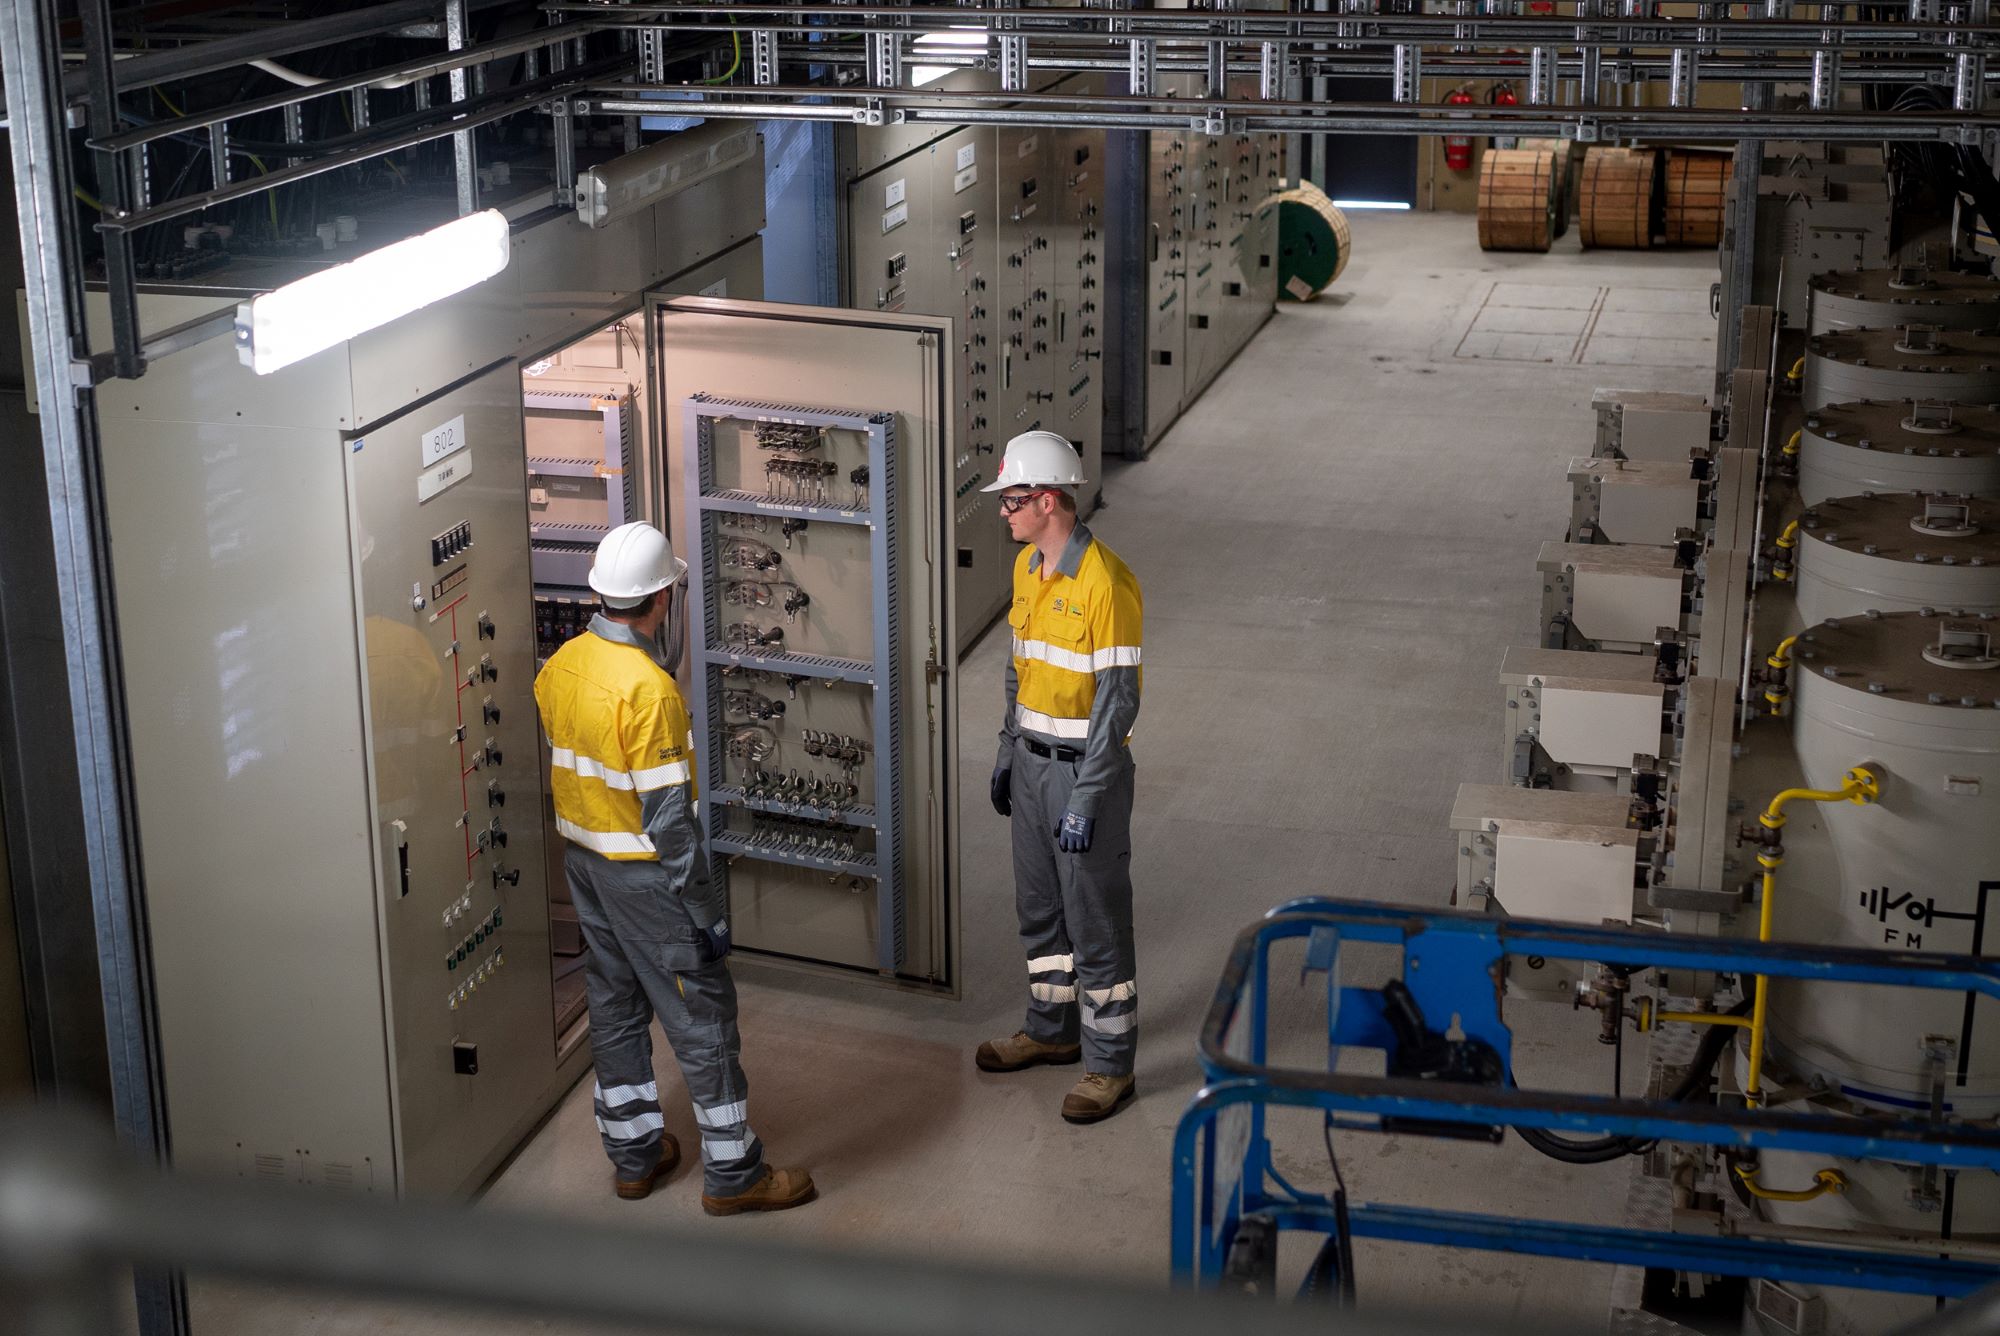 Field crew at open switchboard inside a substation